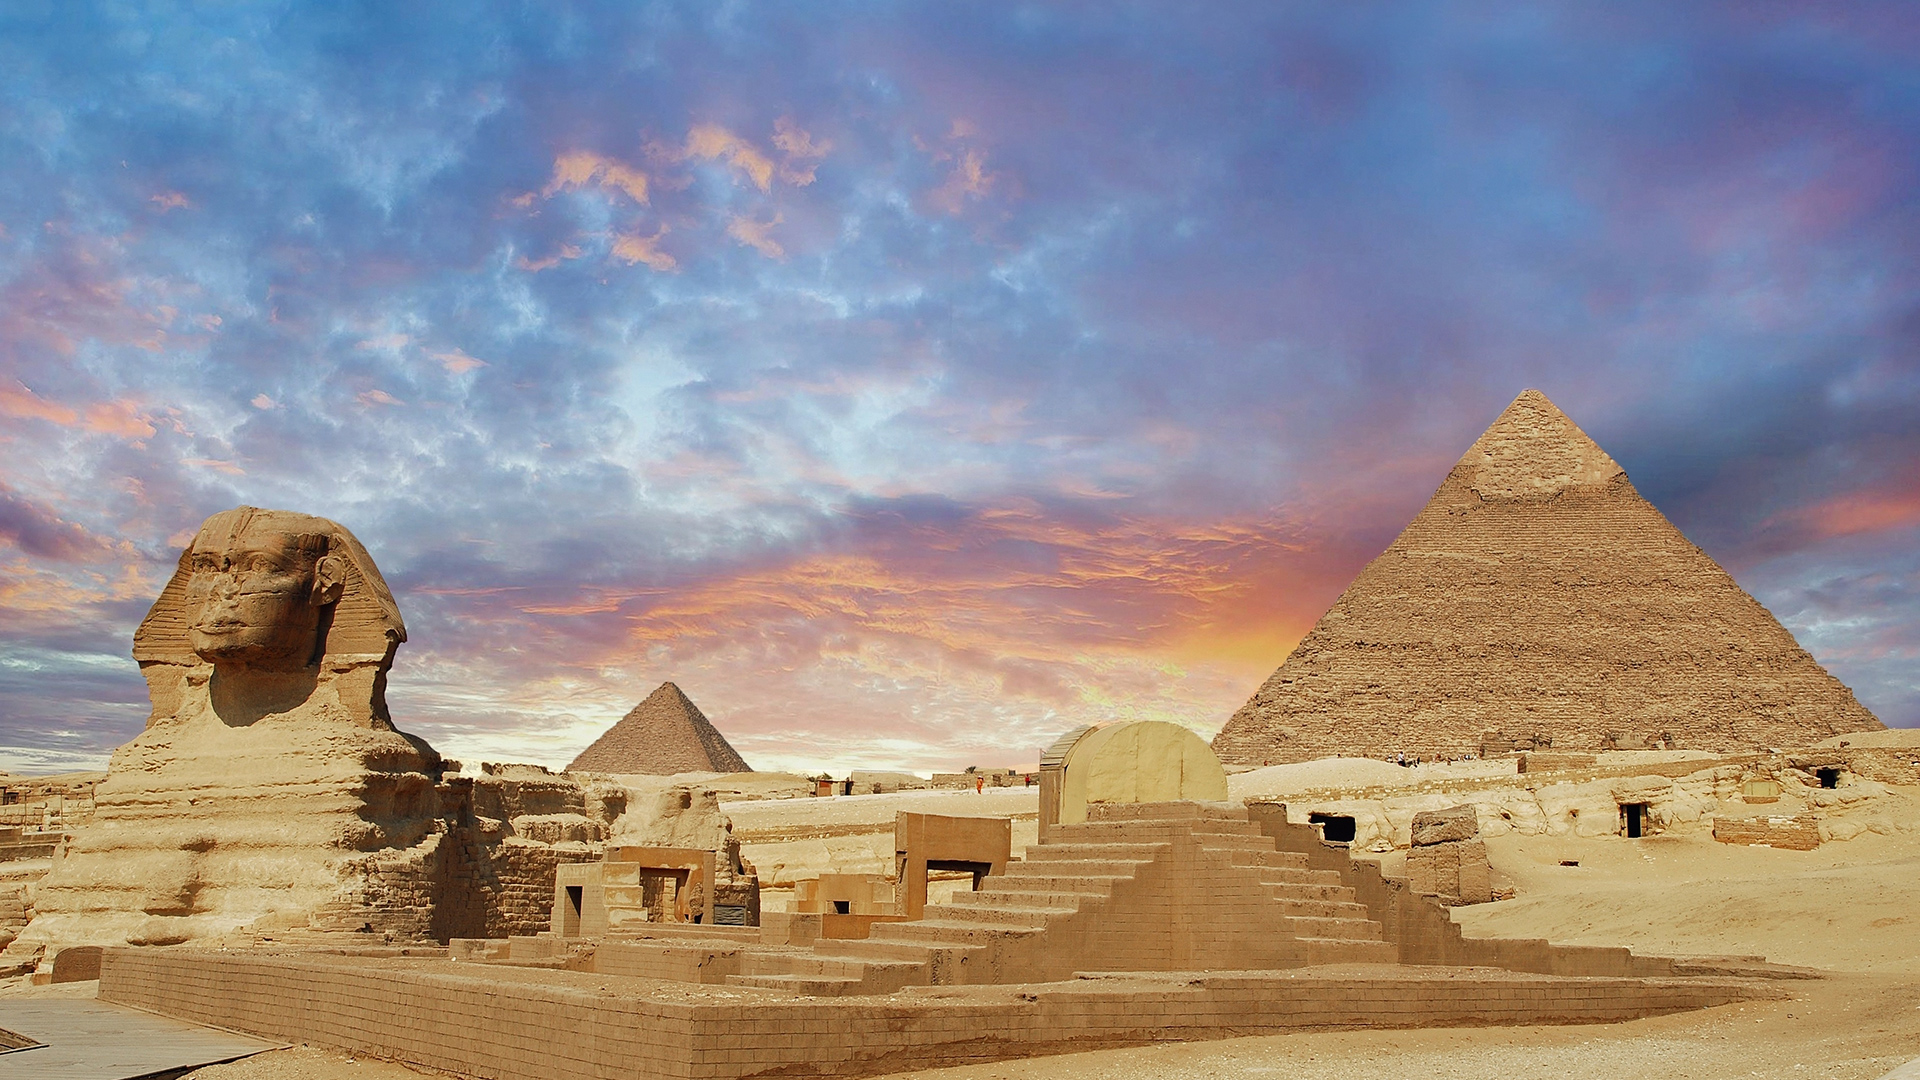 Destinations: The Great Sphinx and Pyramids of Giza at sunset, Egypt, Africa